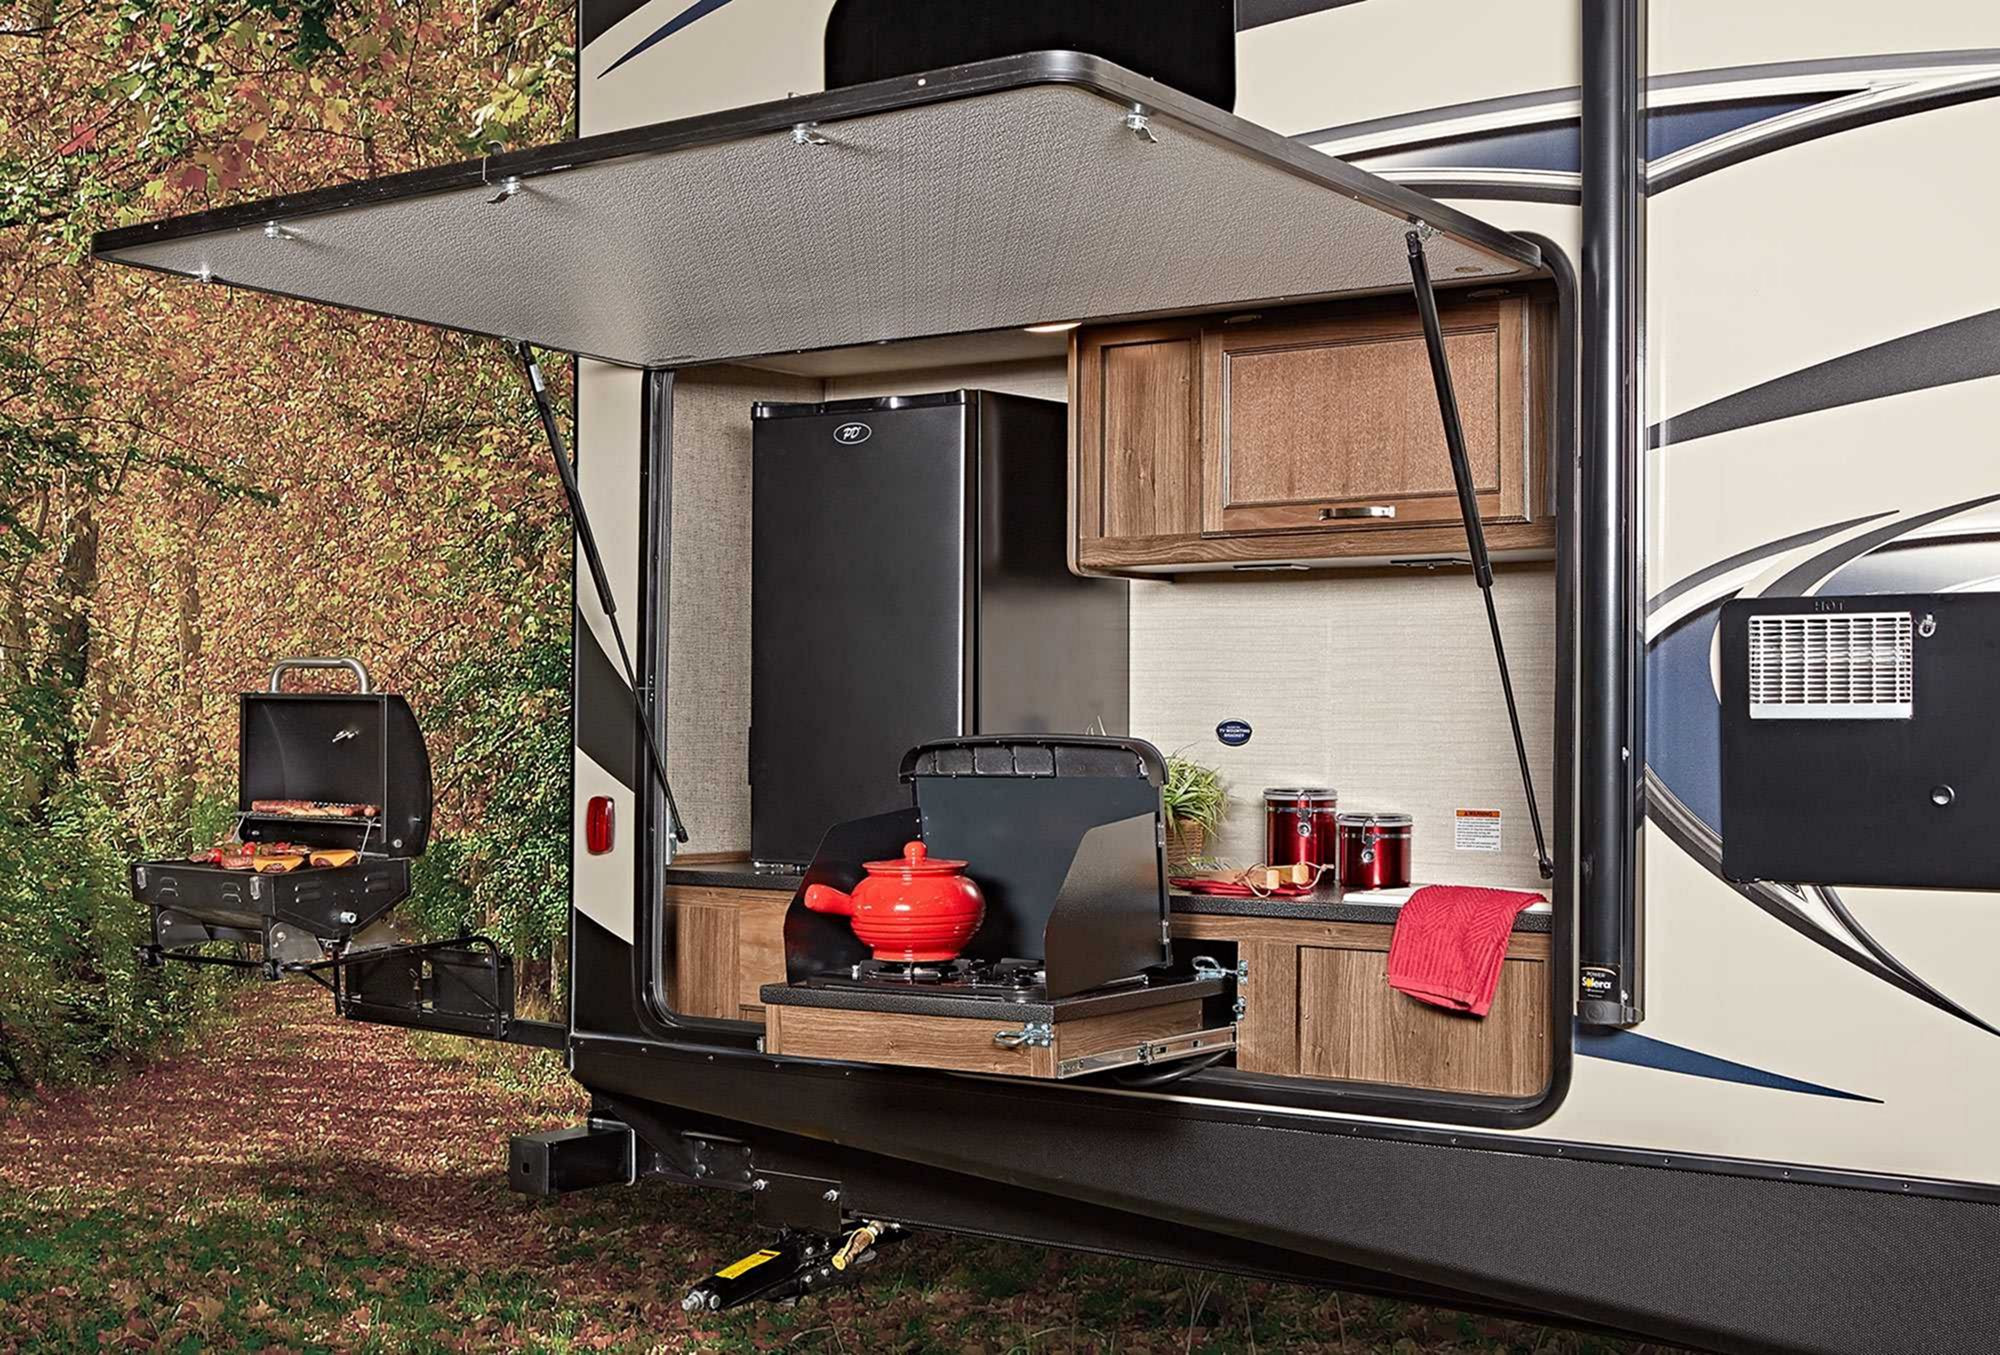 Travel Trailer Outdoor Kitchen
 Travel Trailer With Outdoor Kitchen And Bunkhouse